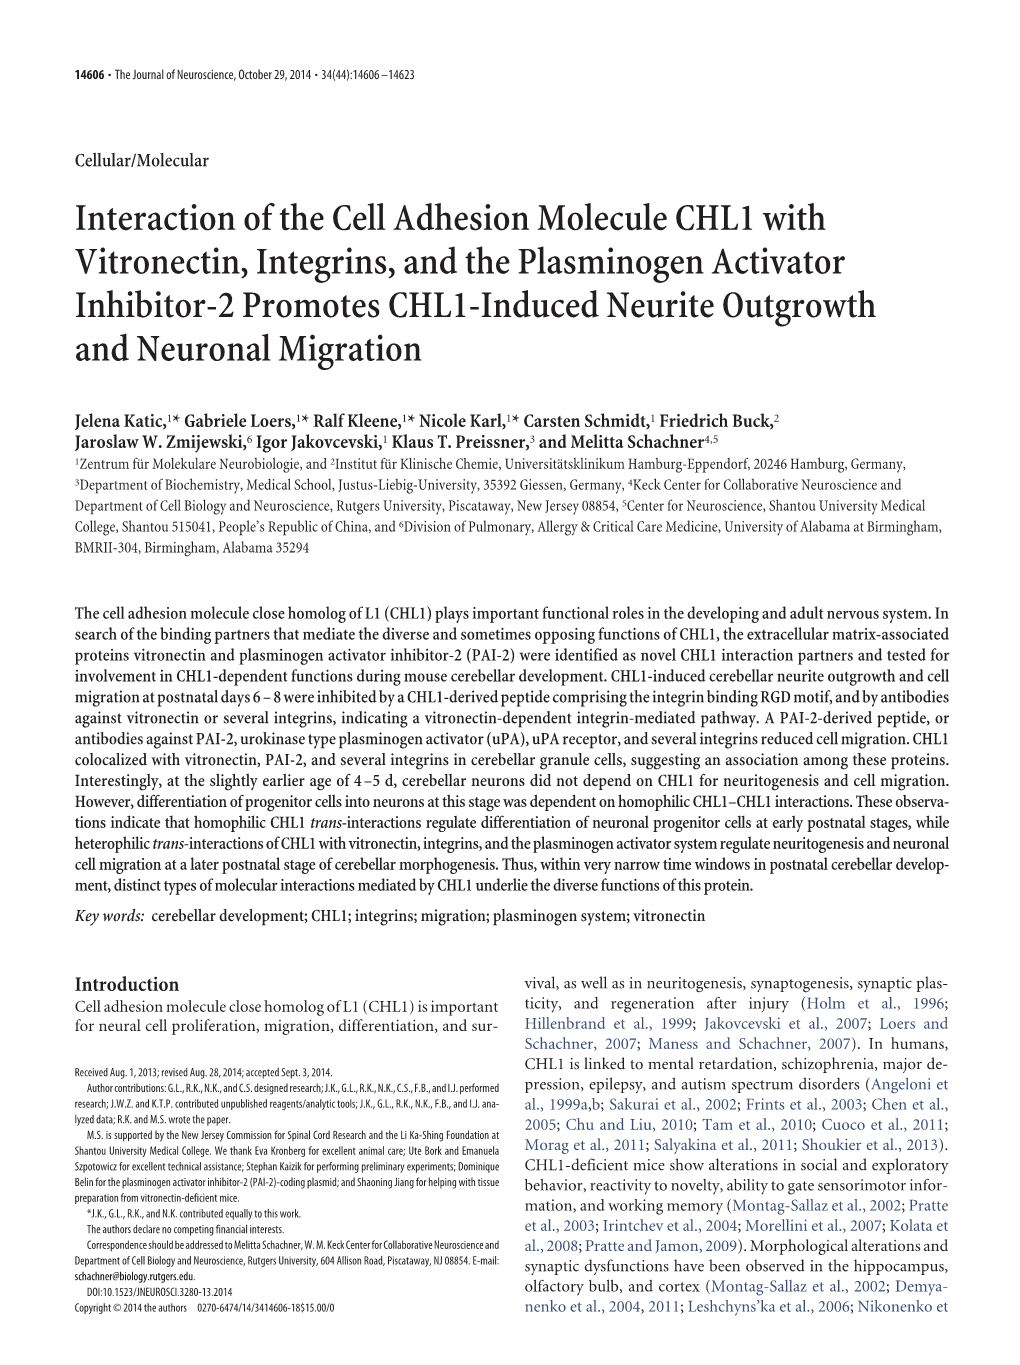 Interaction of the Cell Adhesion Molecule CHL1 with Vitronectin